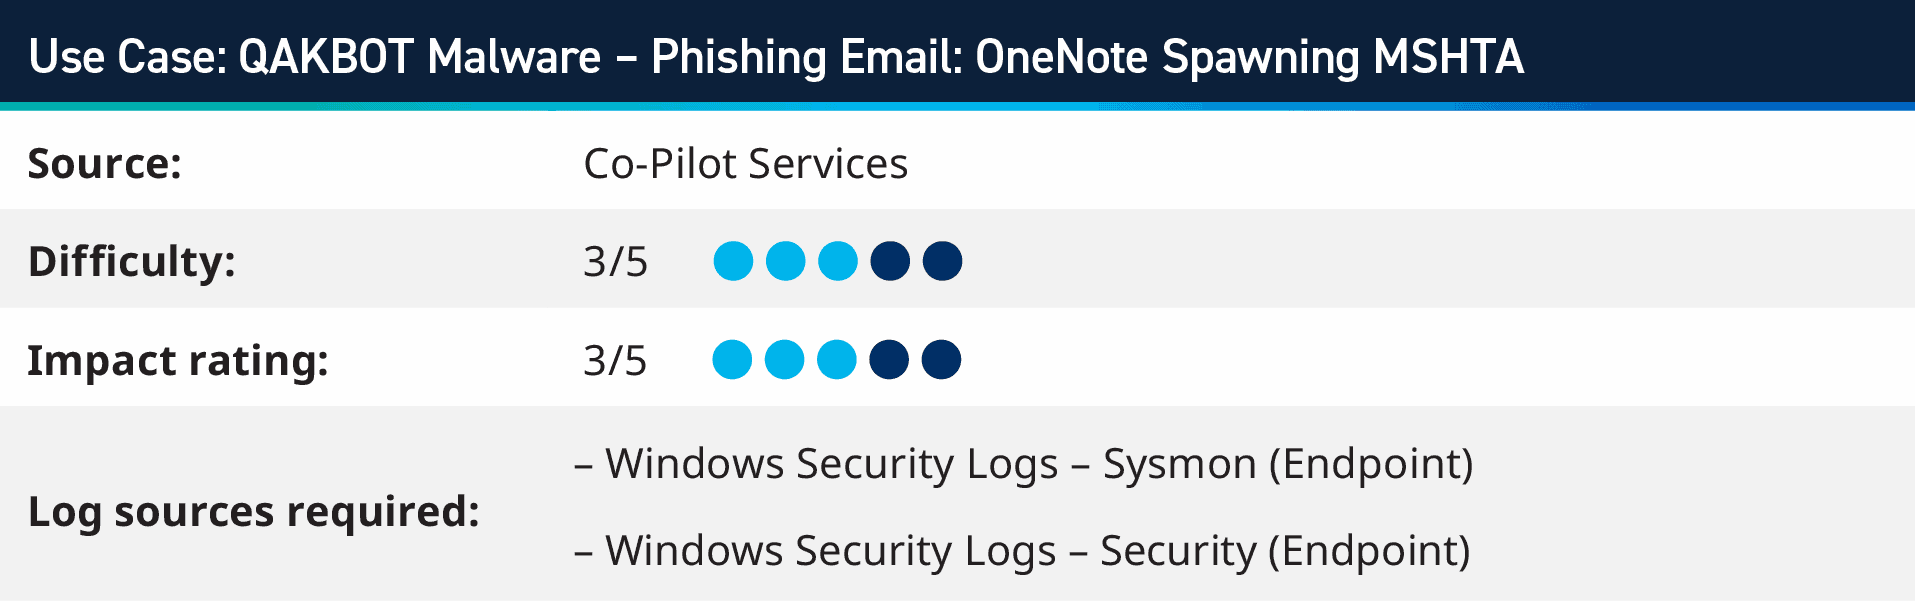 Cybersecurity Use Case: Detecting OneNote Spawning MSHTA to Prevent QAKBOT Malware